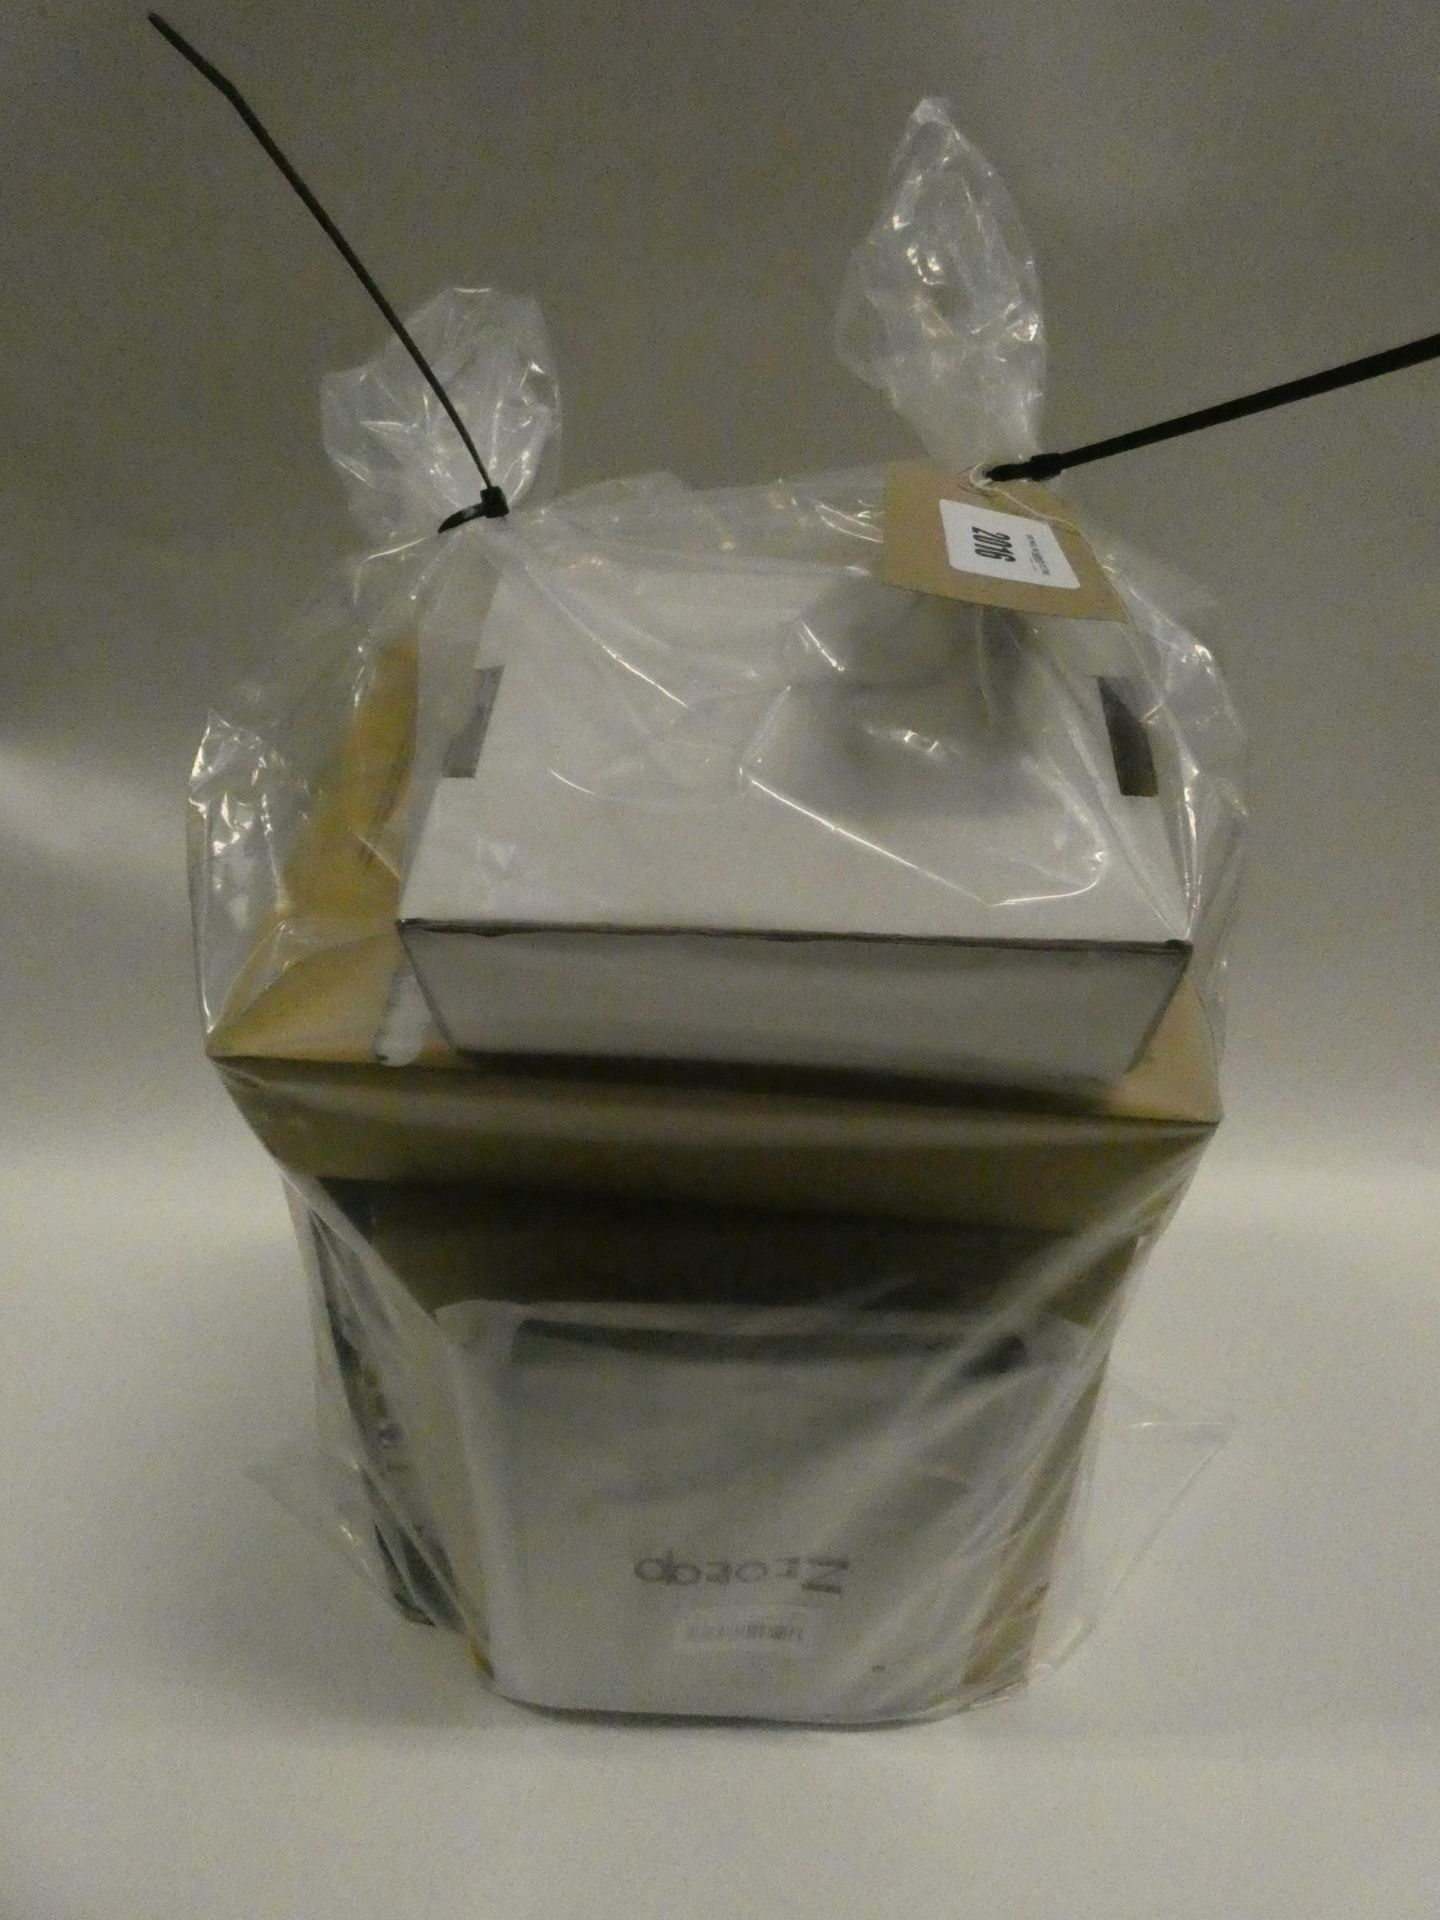 Bag containing of Freesat TV box and Sky routers